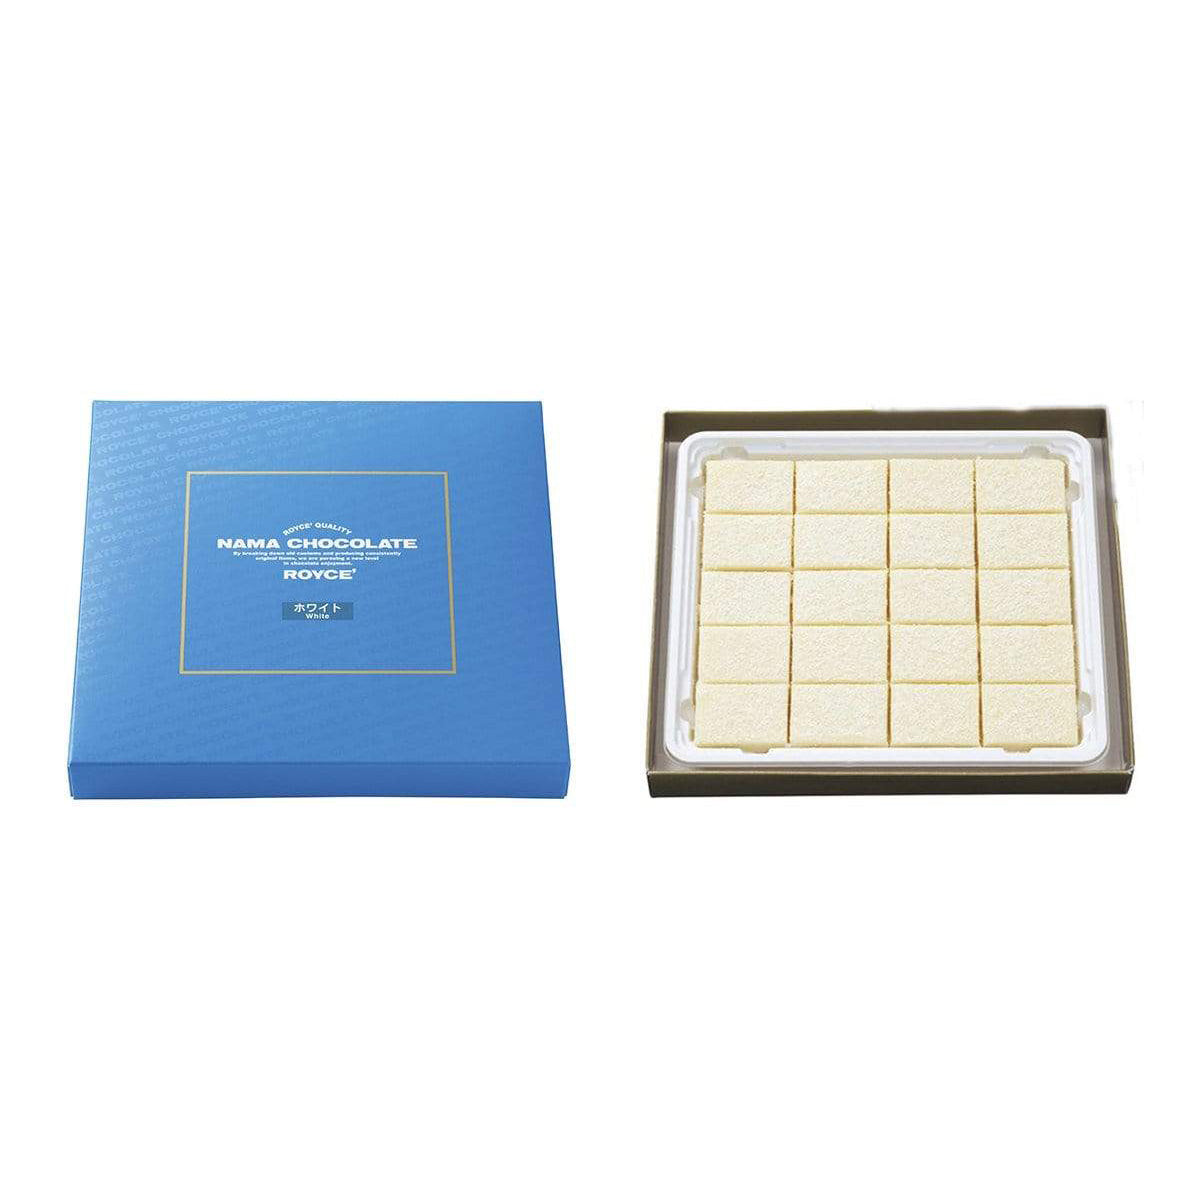 ROYCE' Chocolate - Nama Chocolate "White" - Image shows a blue box on left with white text inside golden square saying ROYCE' Quality Nama Chocolate By breaking down old customs and producing consistently original items, we are pursuing a new level in chocolate enjoyment. ROYCE' White. Box on right shows white blocks of chocolates.